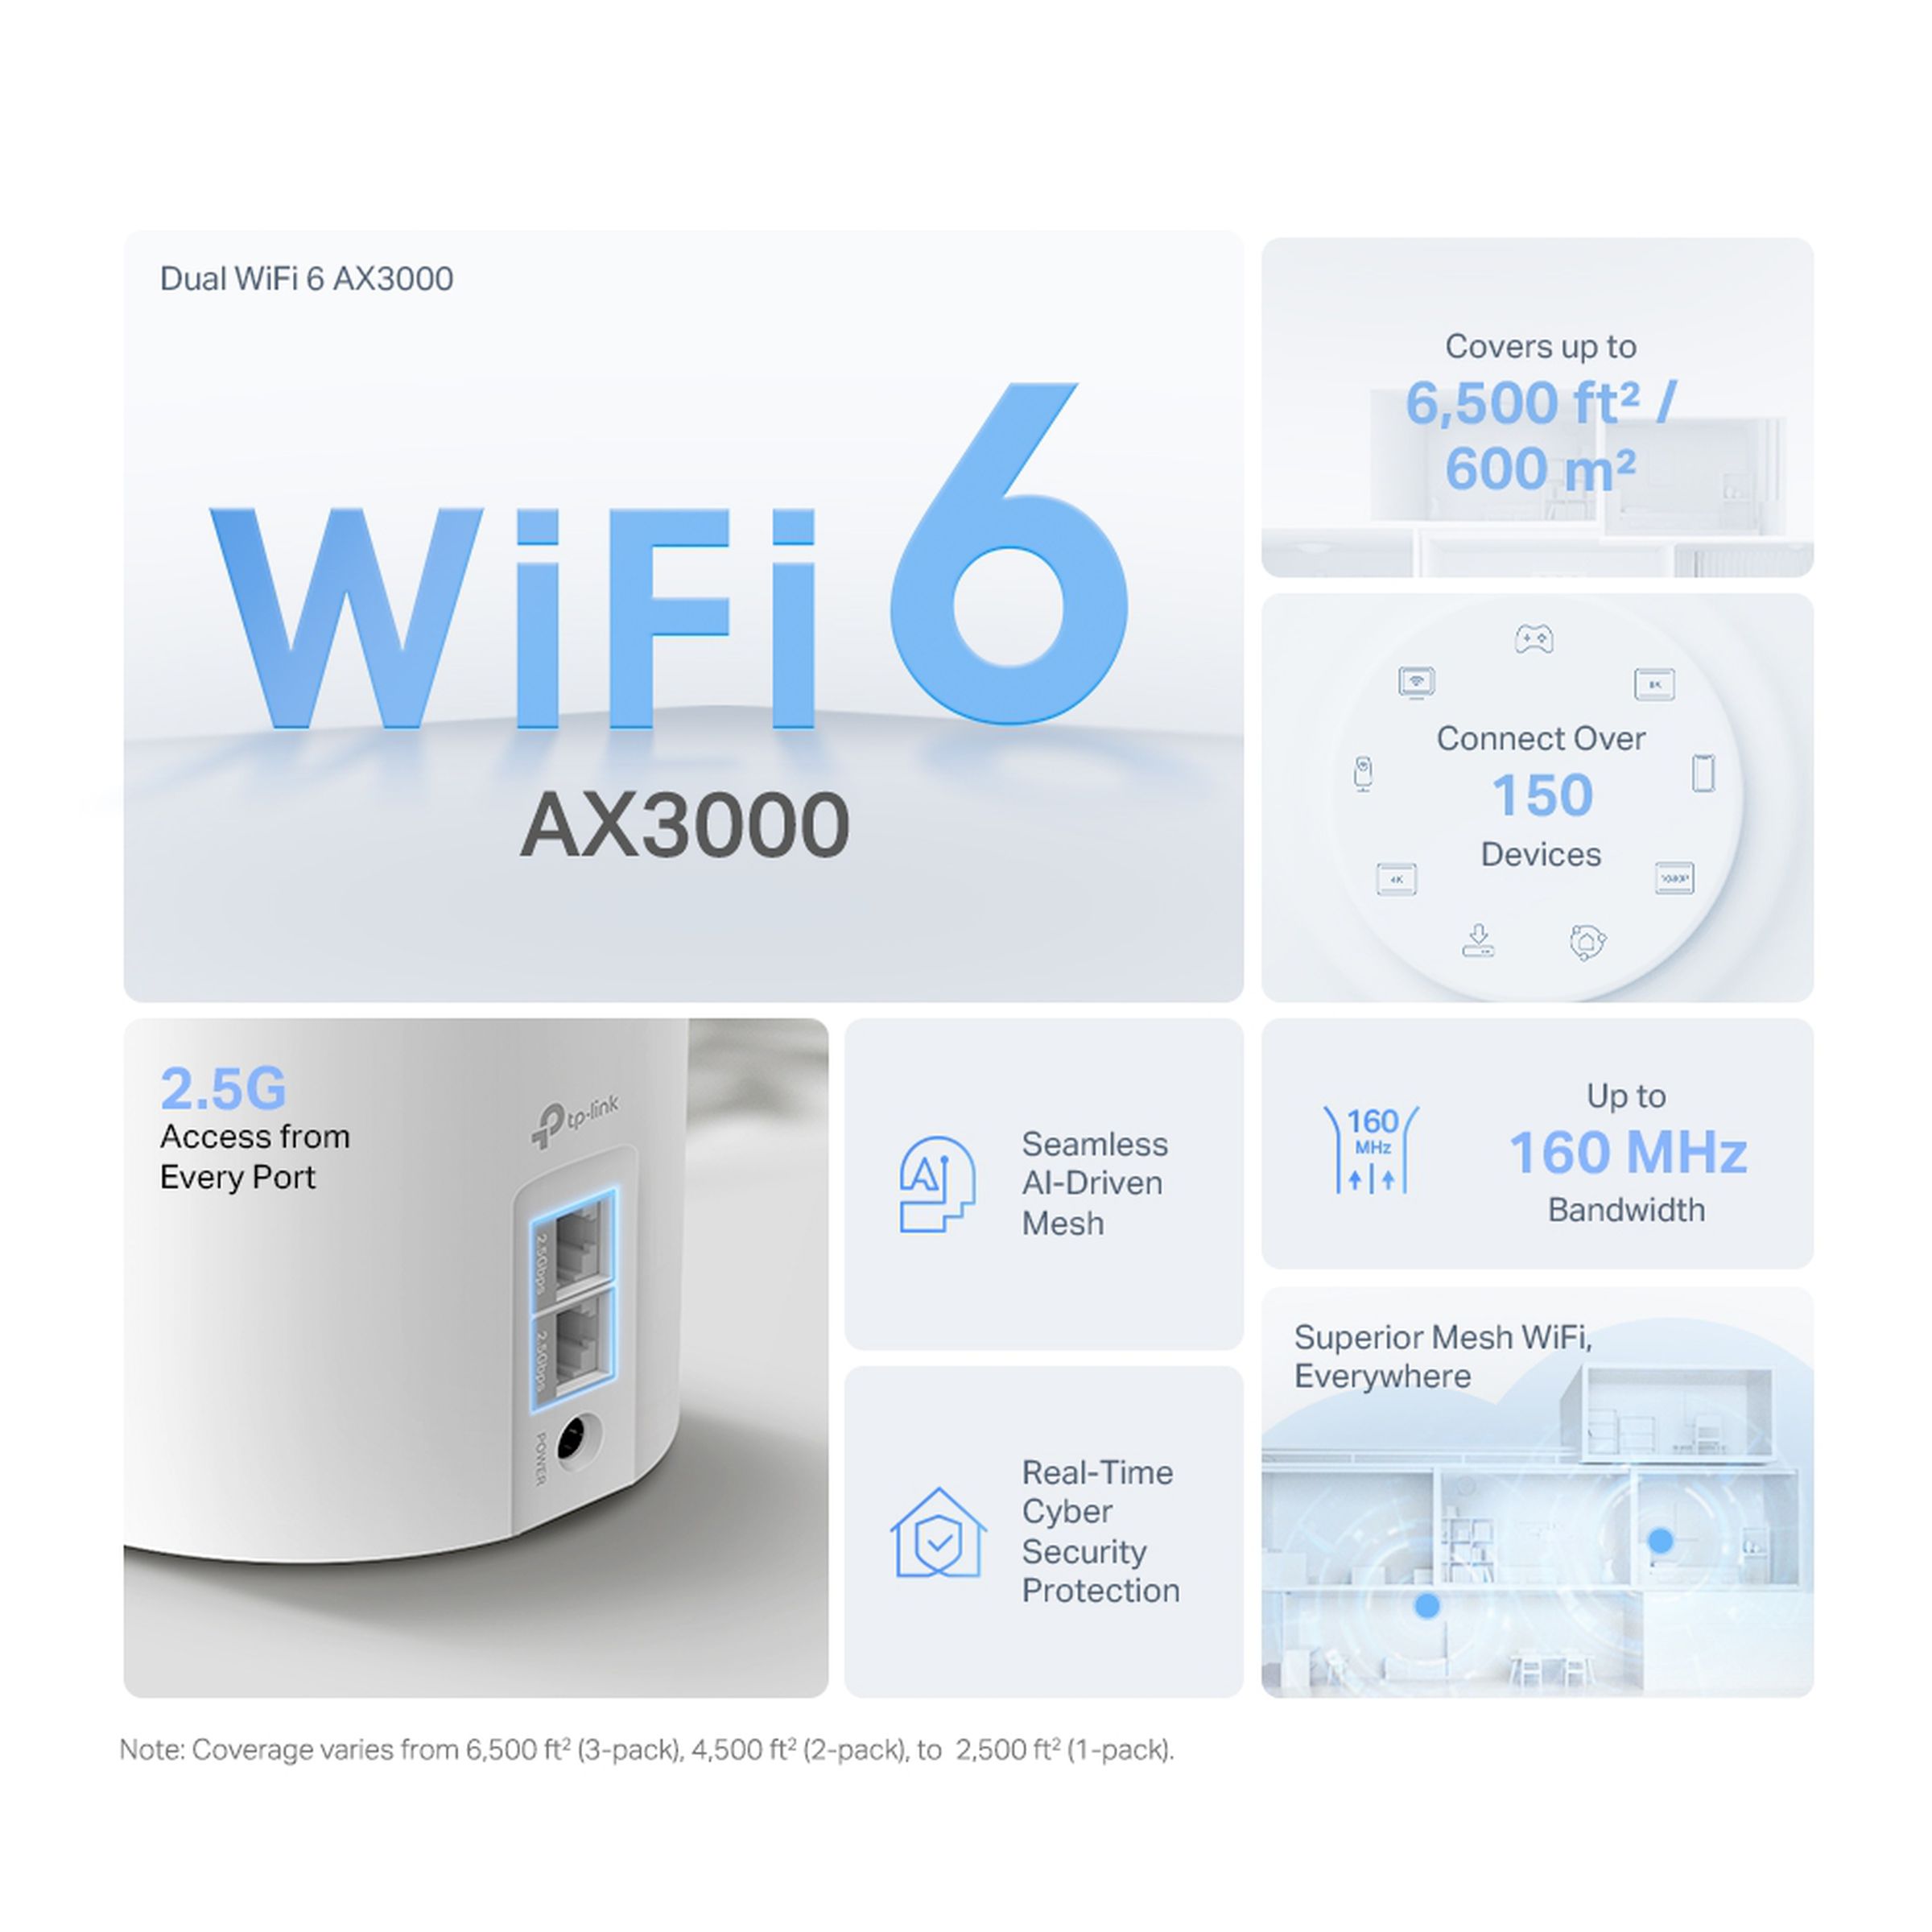 A marketing image from TP-Link showing various features for its new Deco X55 Pro&nbsp;mesh router, such as Wi-Fi 6 and 2.5G ethernet.